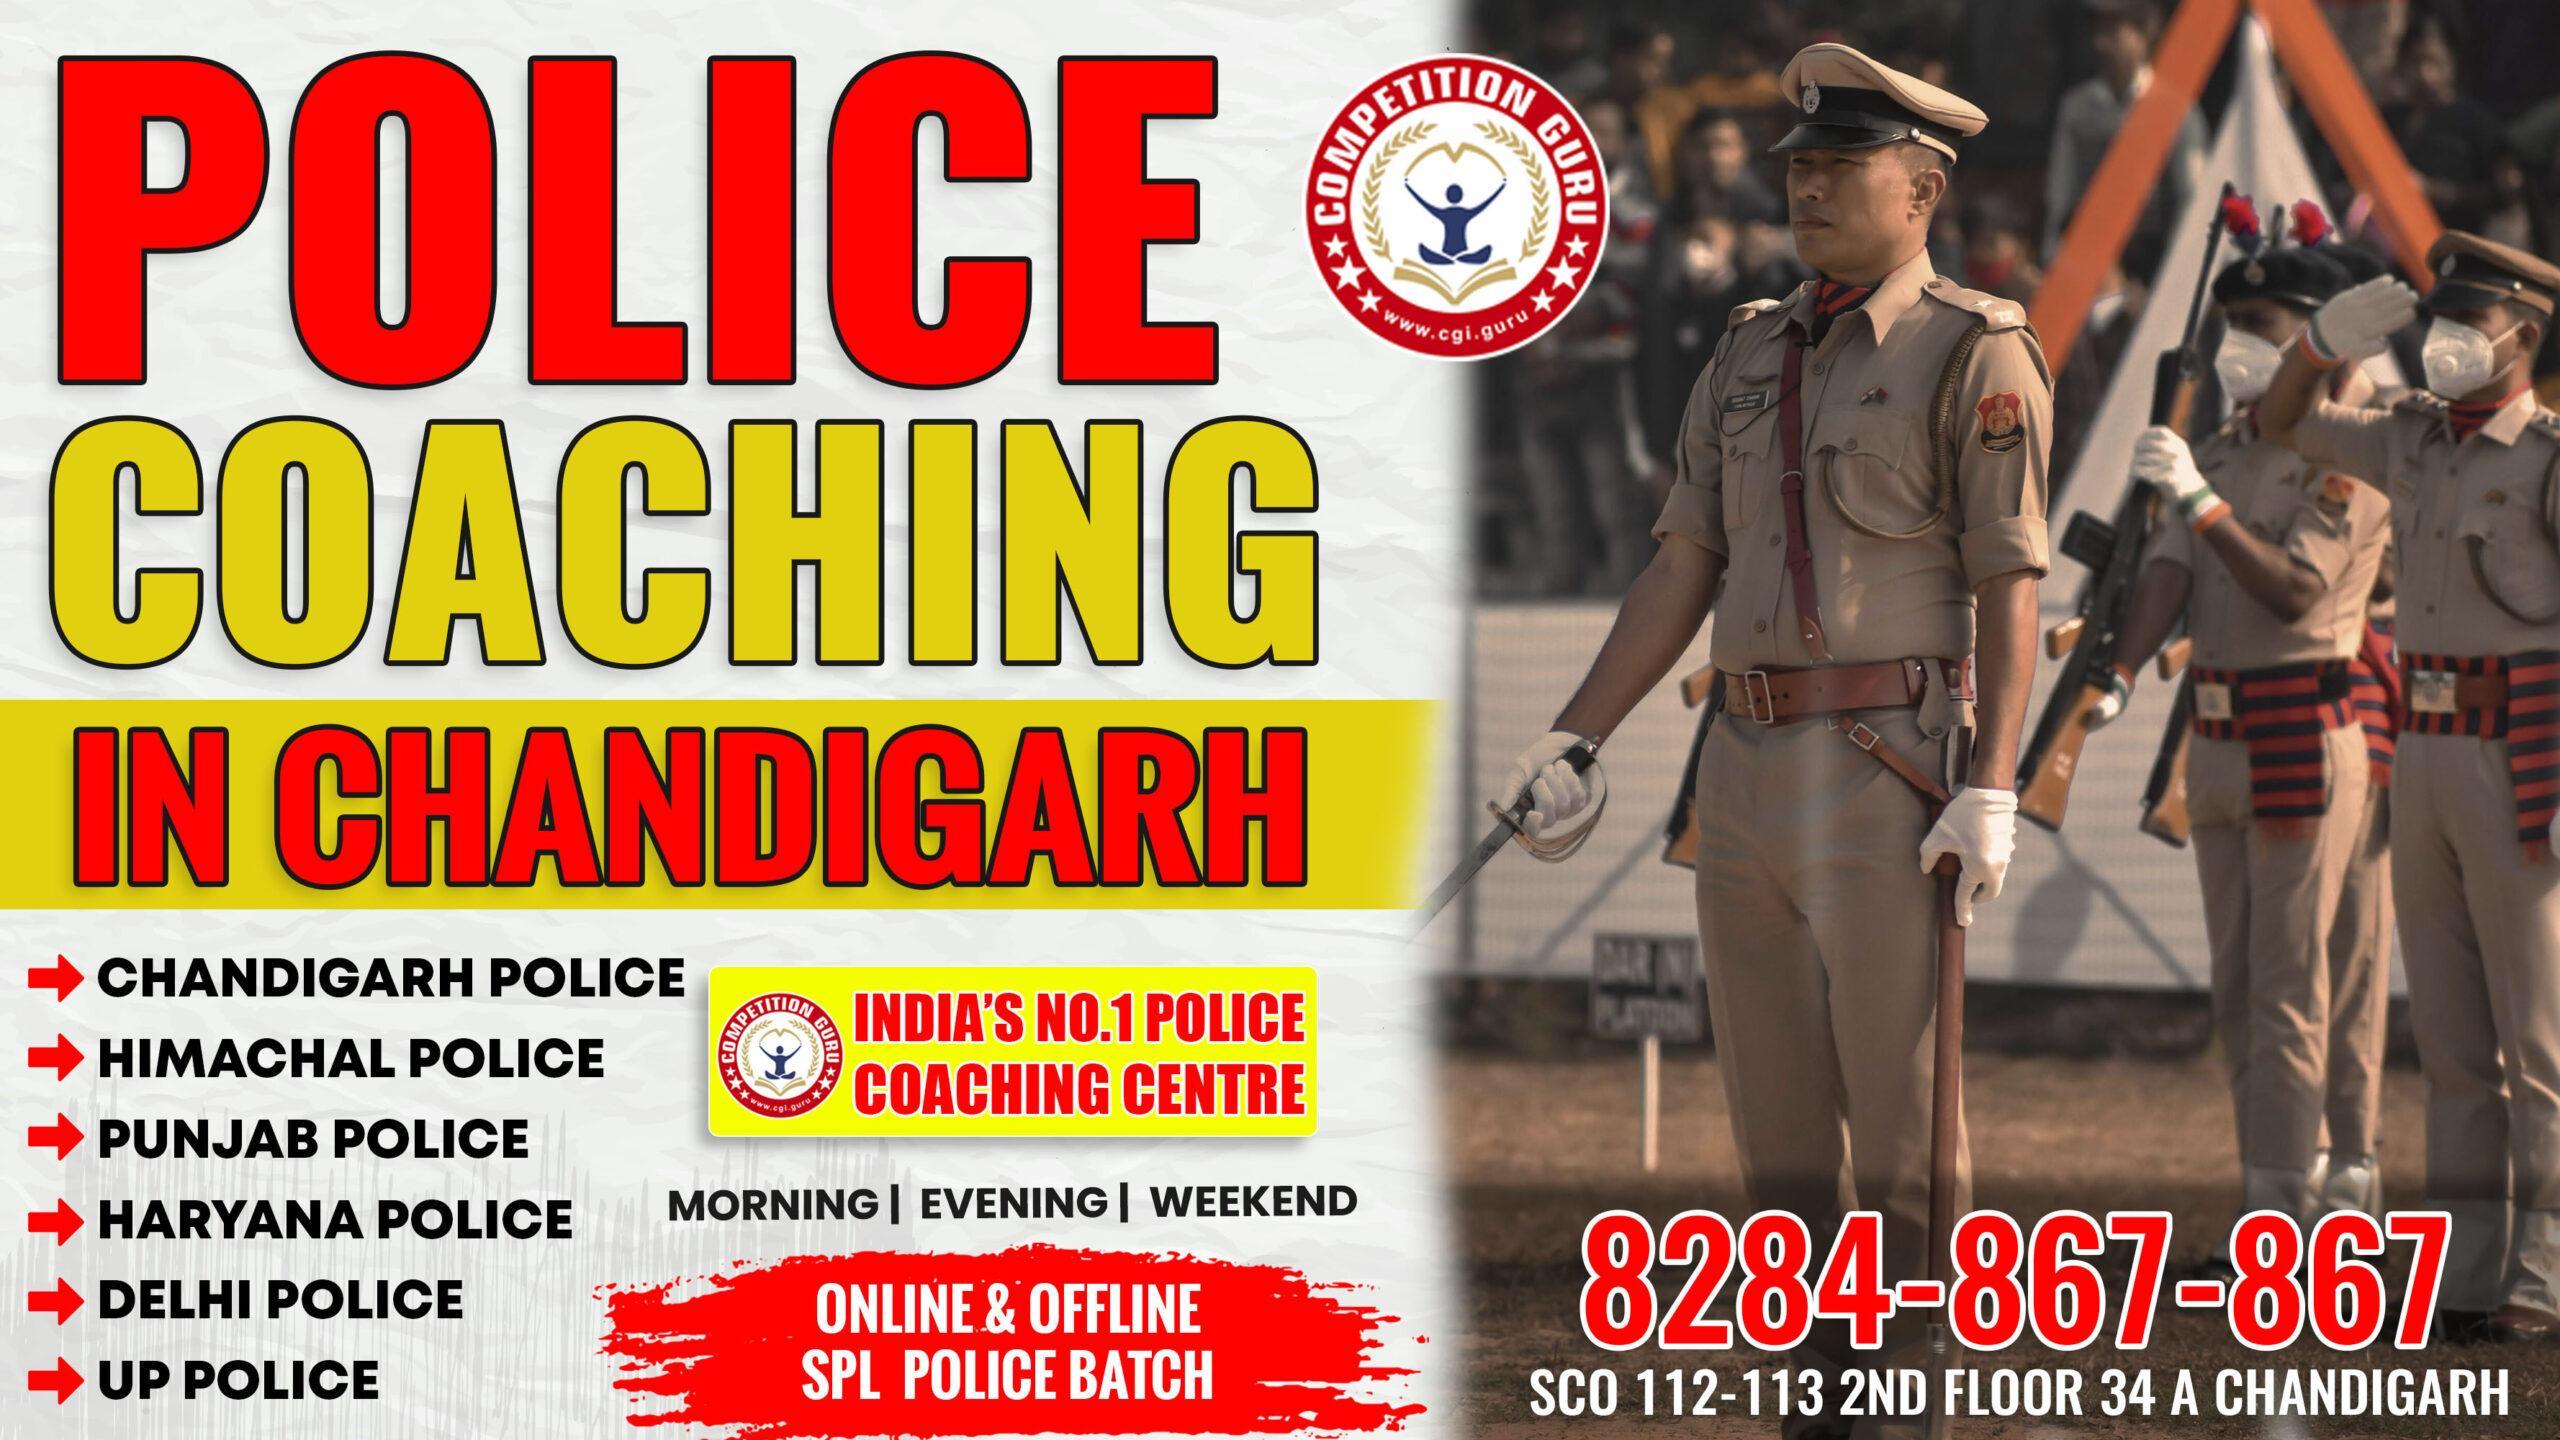 Police-Coaching-in-Chandigarh